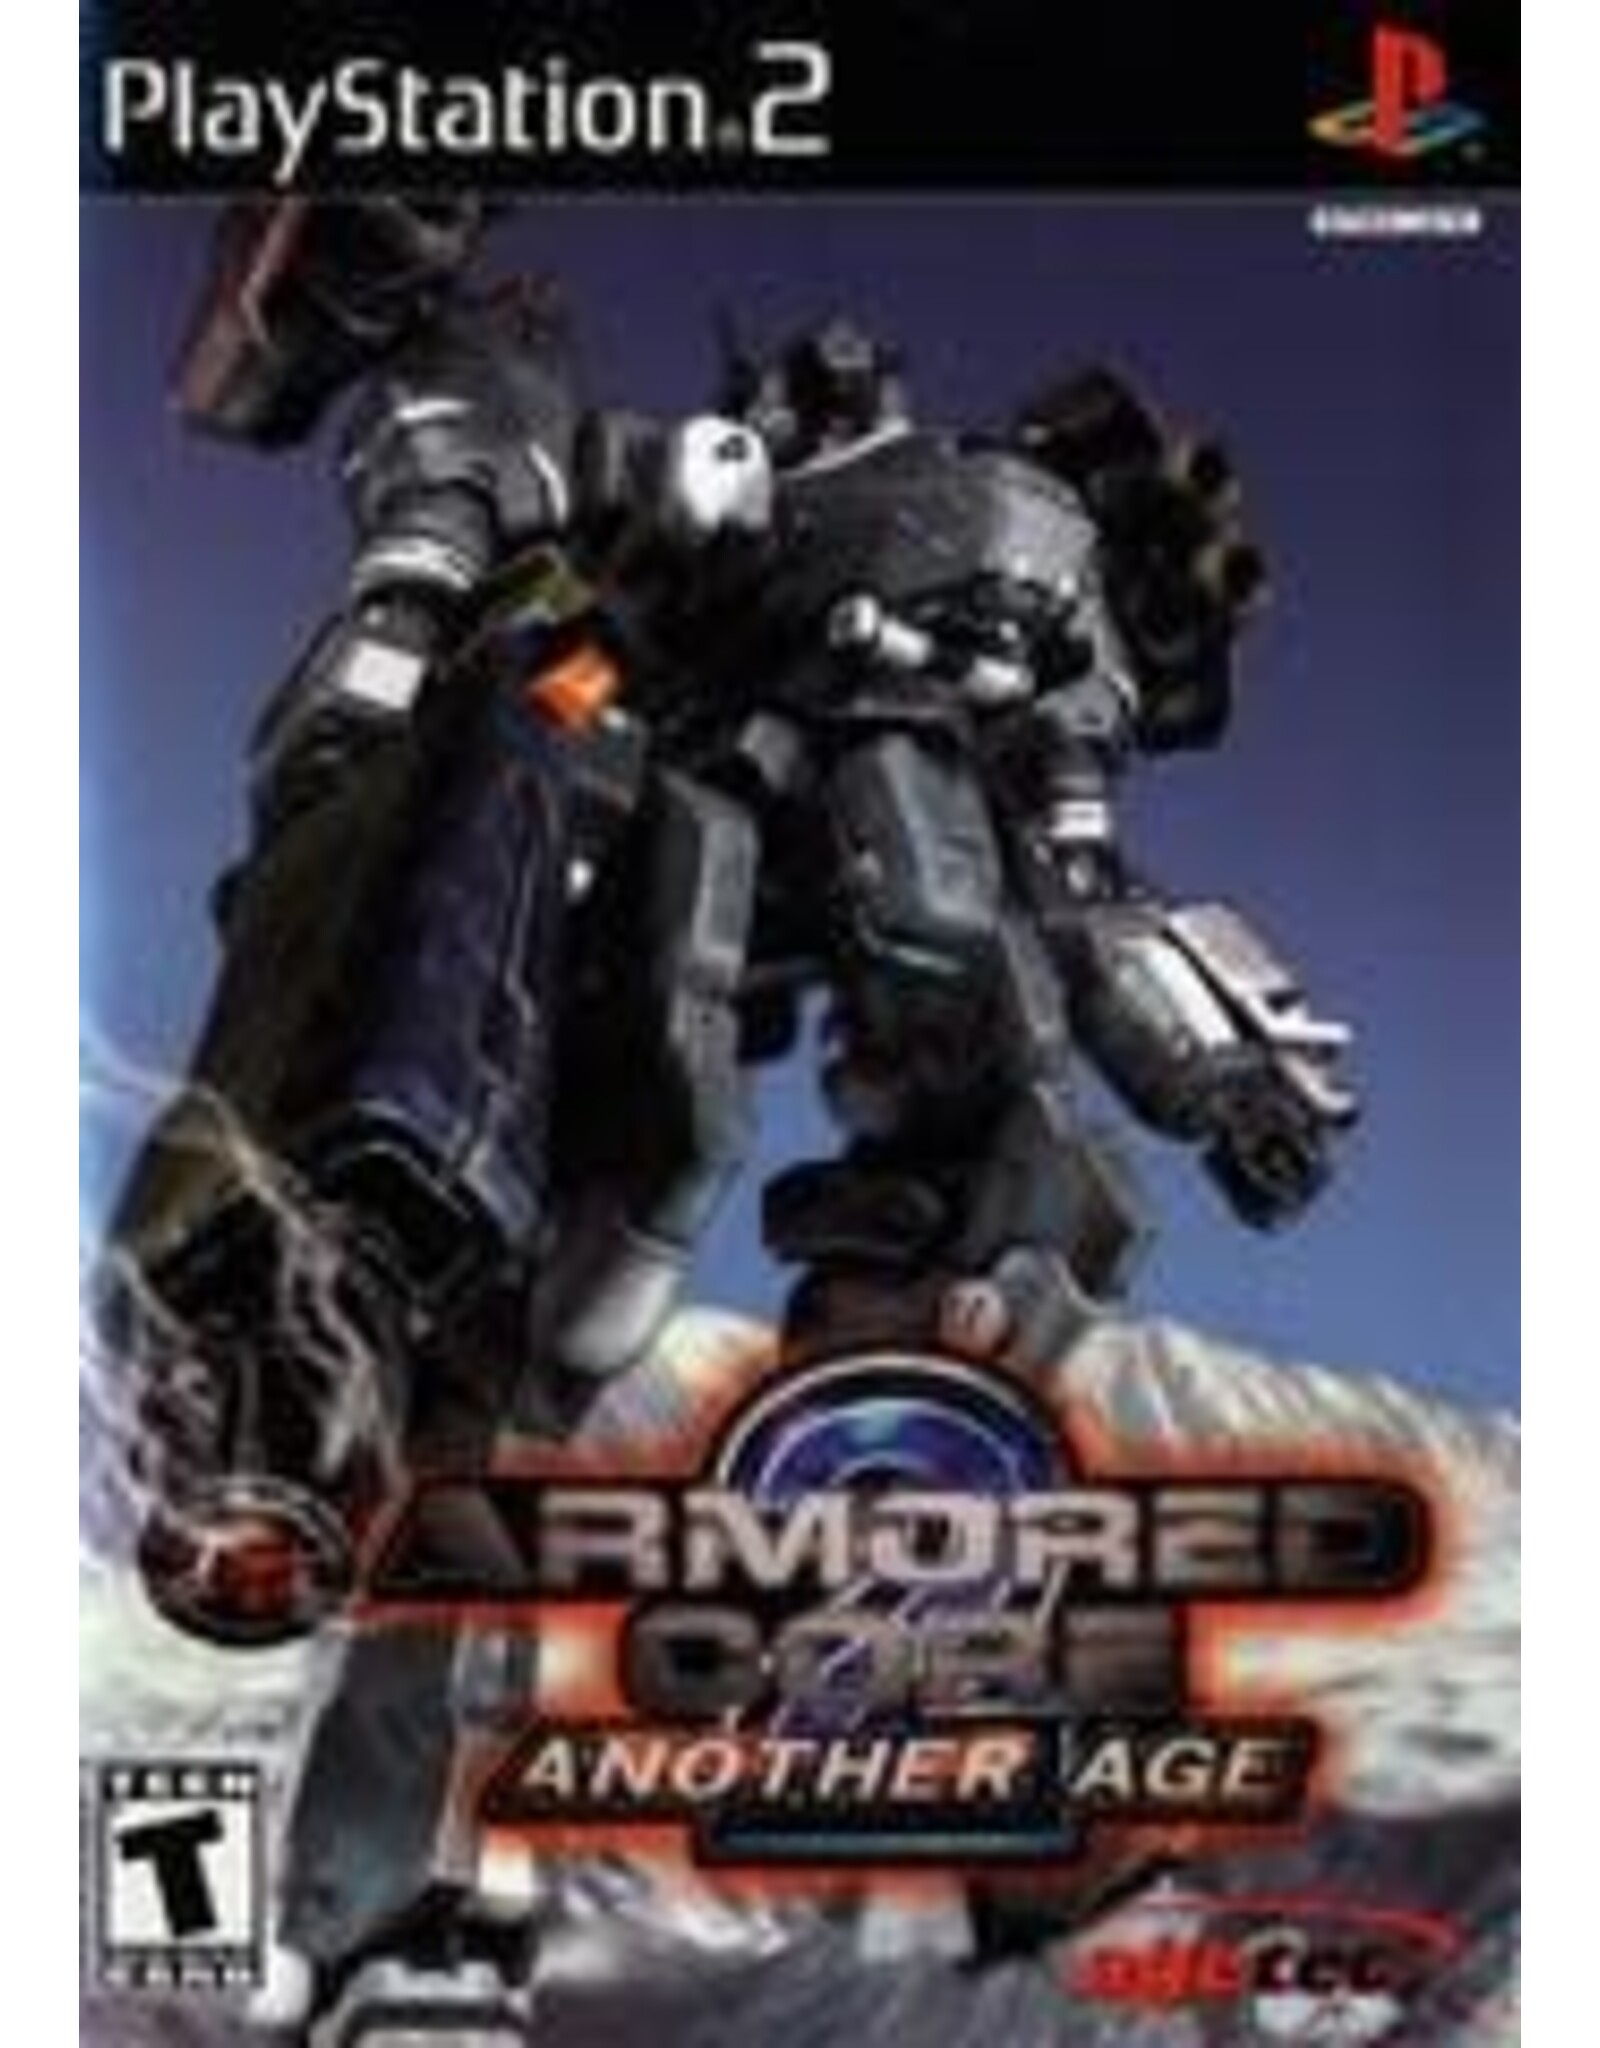 Playstation 2 Armored Core 2 Another Age (CiB)